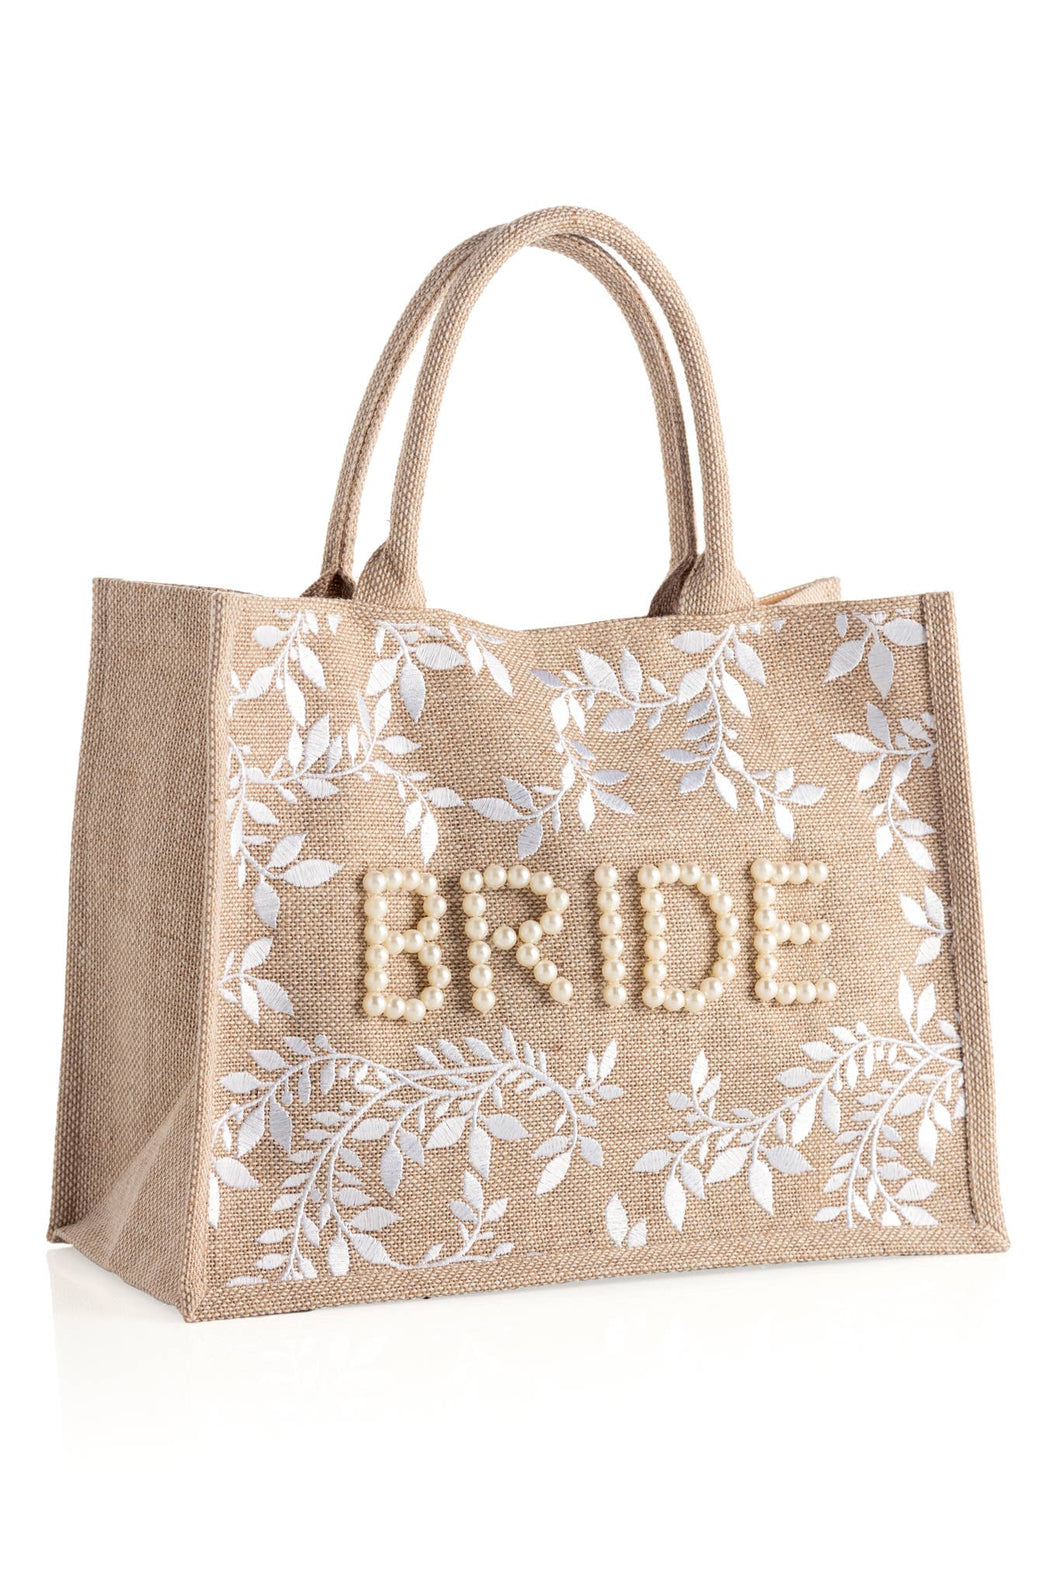 The Floral Pearl Bride Tote